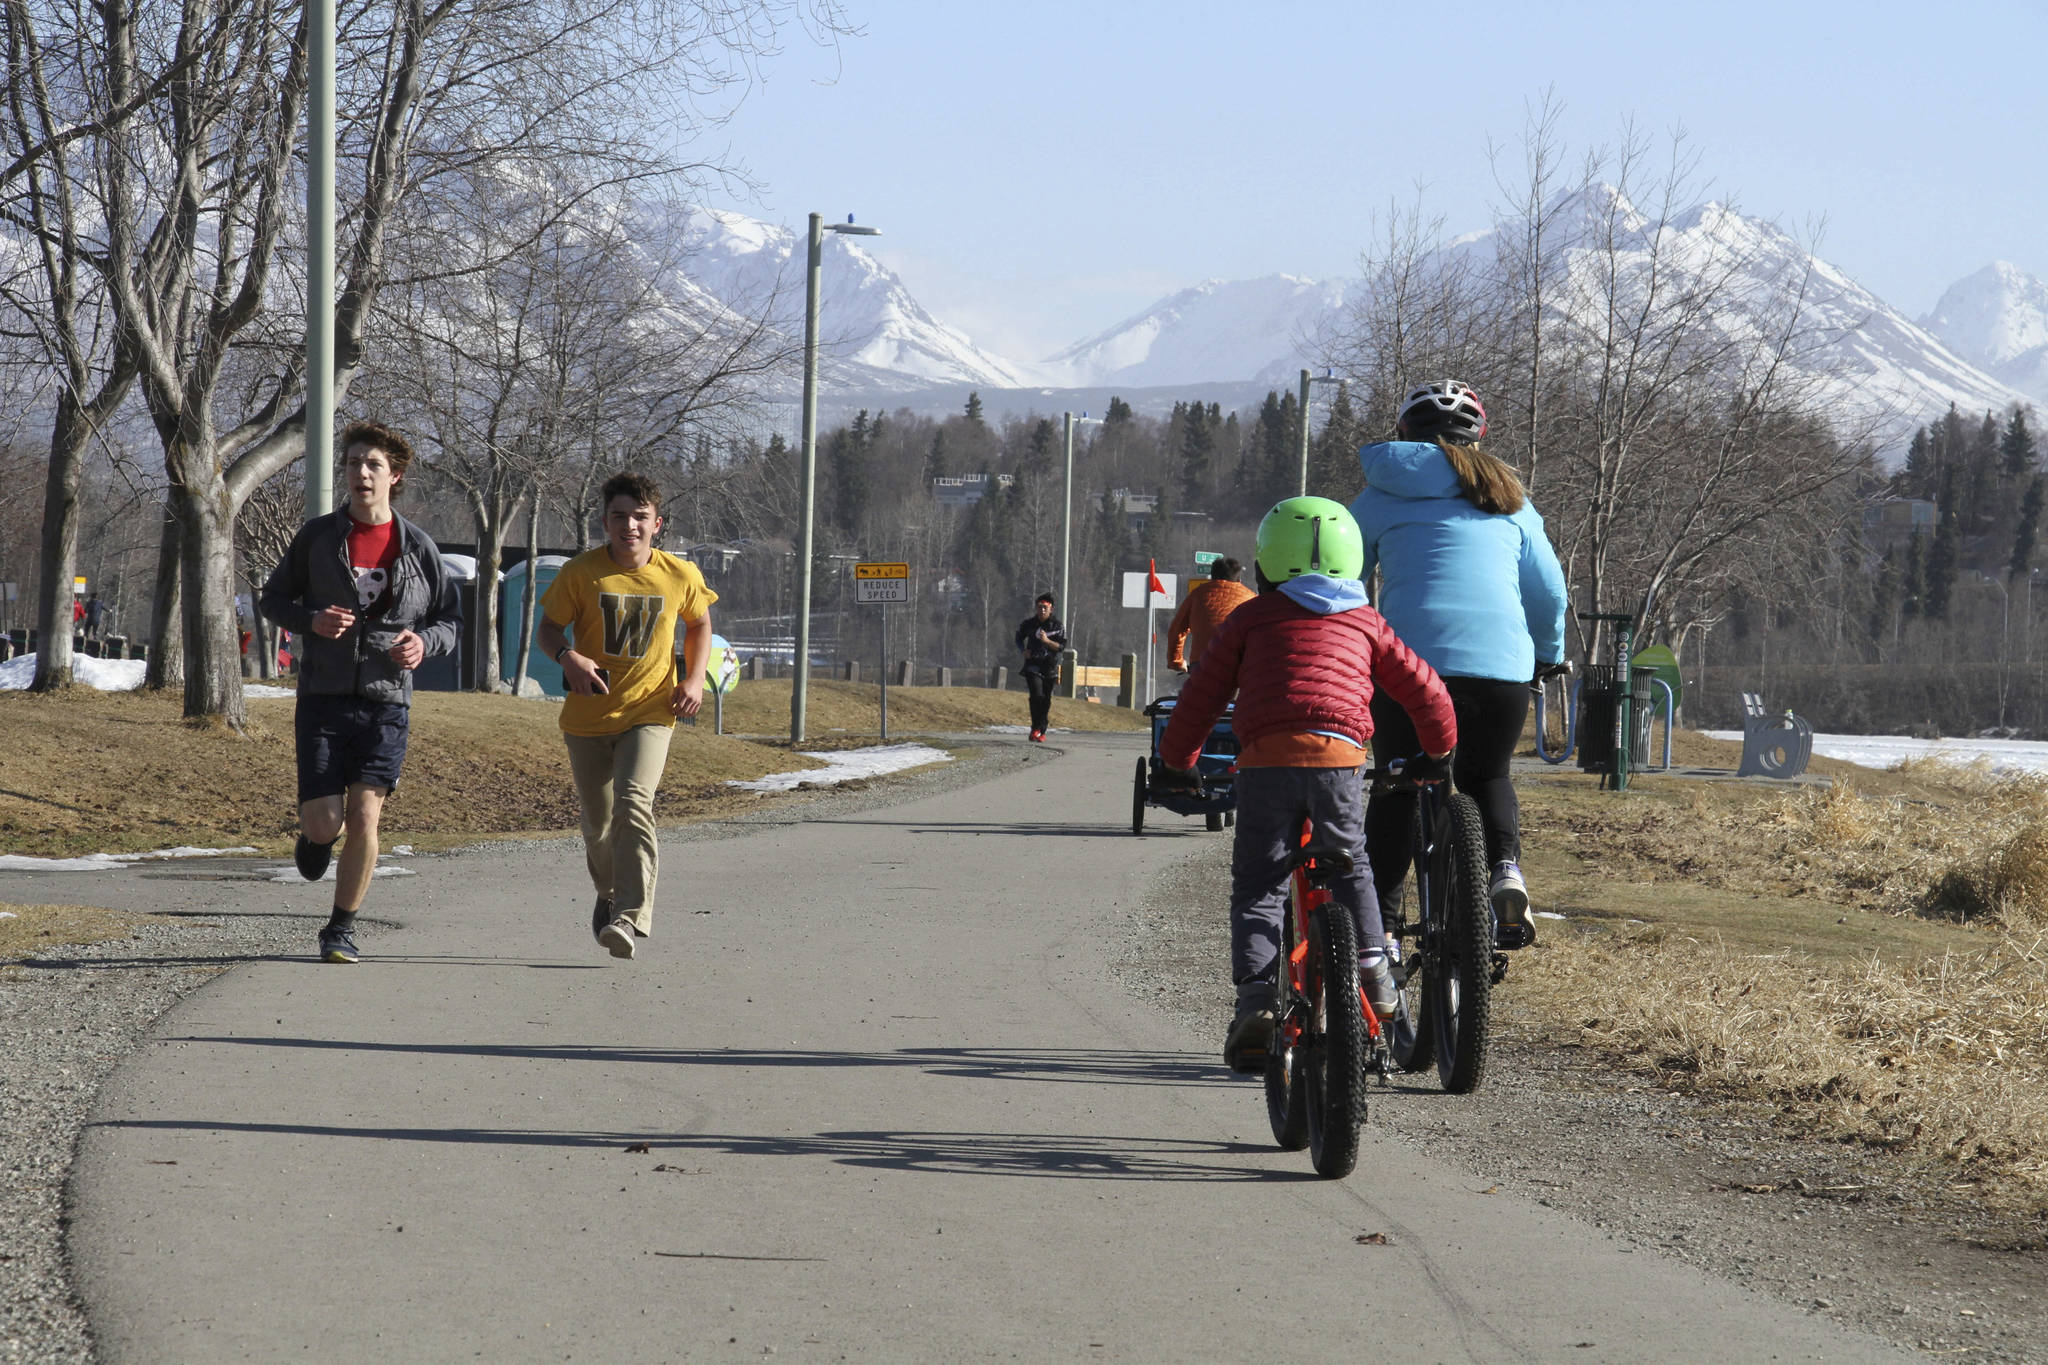 This April 3, 2019, photo shows people running and biking at Westchester Lagoon in Anchorage, Alaska, with the snow-covered Chugach Mountains in the distance. Much of Anchorage’s snow disappeared as Alaska experienced unseasonably warm weather in March. (AP Photo/Mark Thiessen)